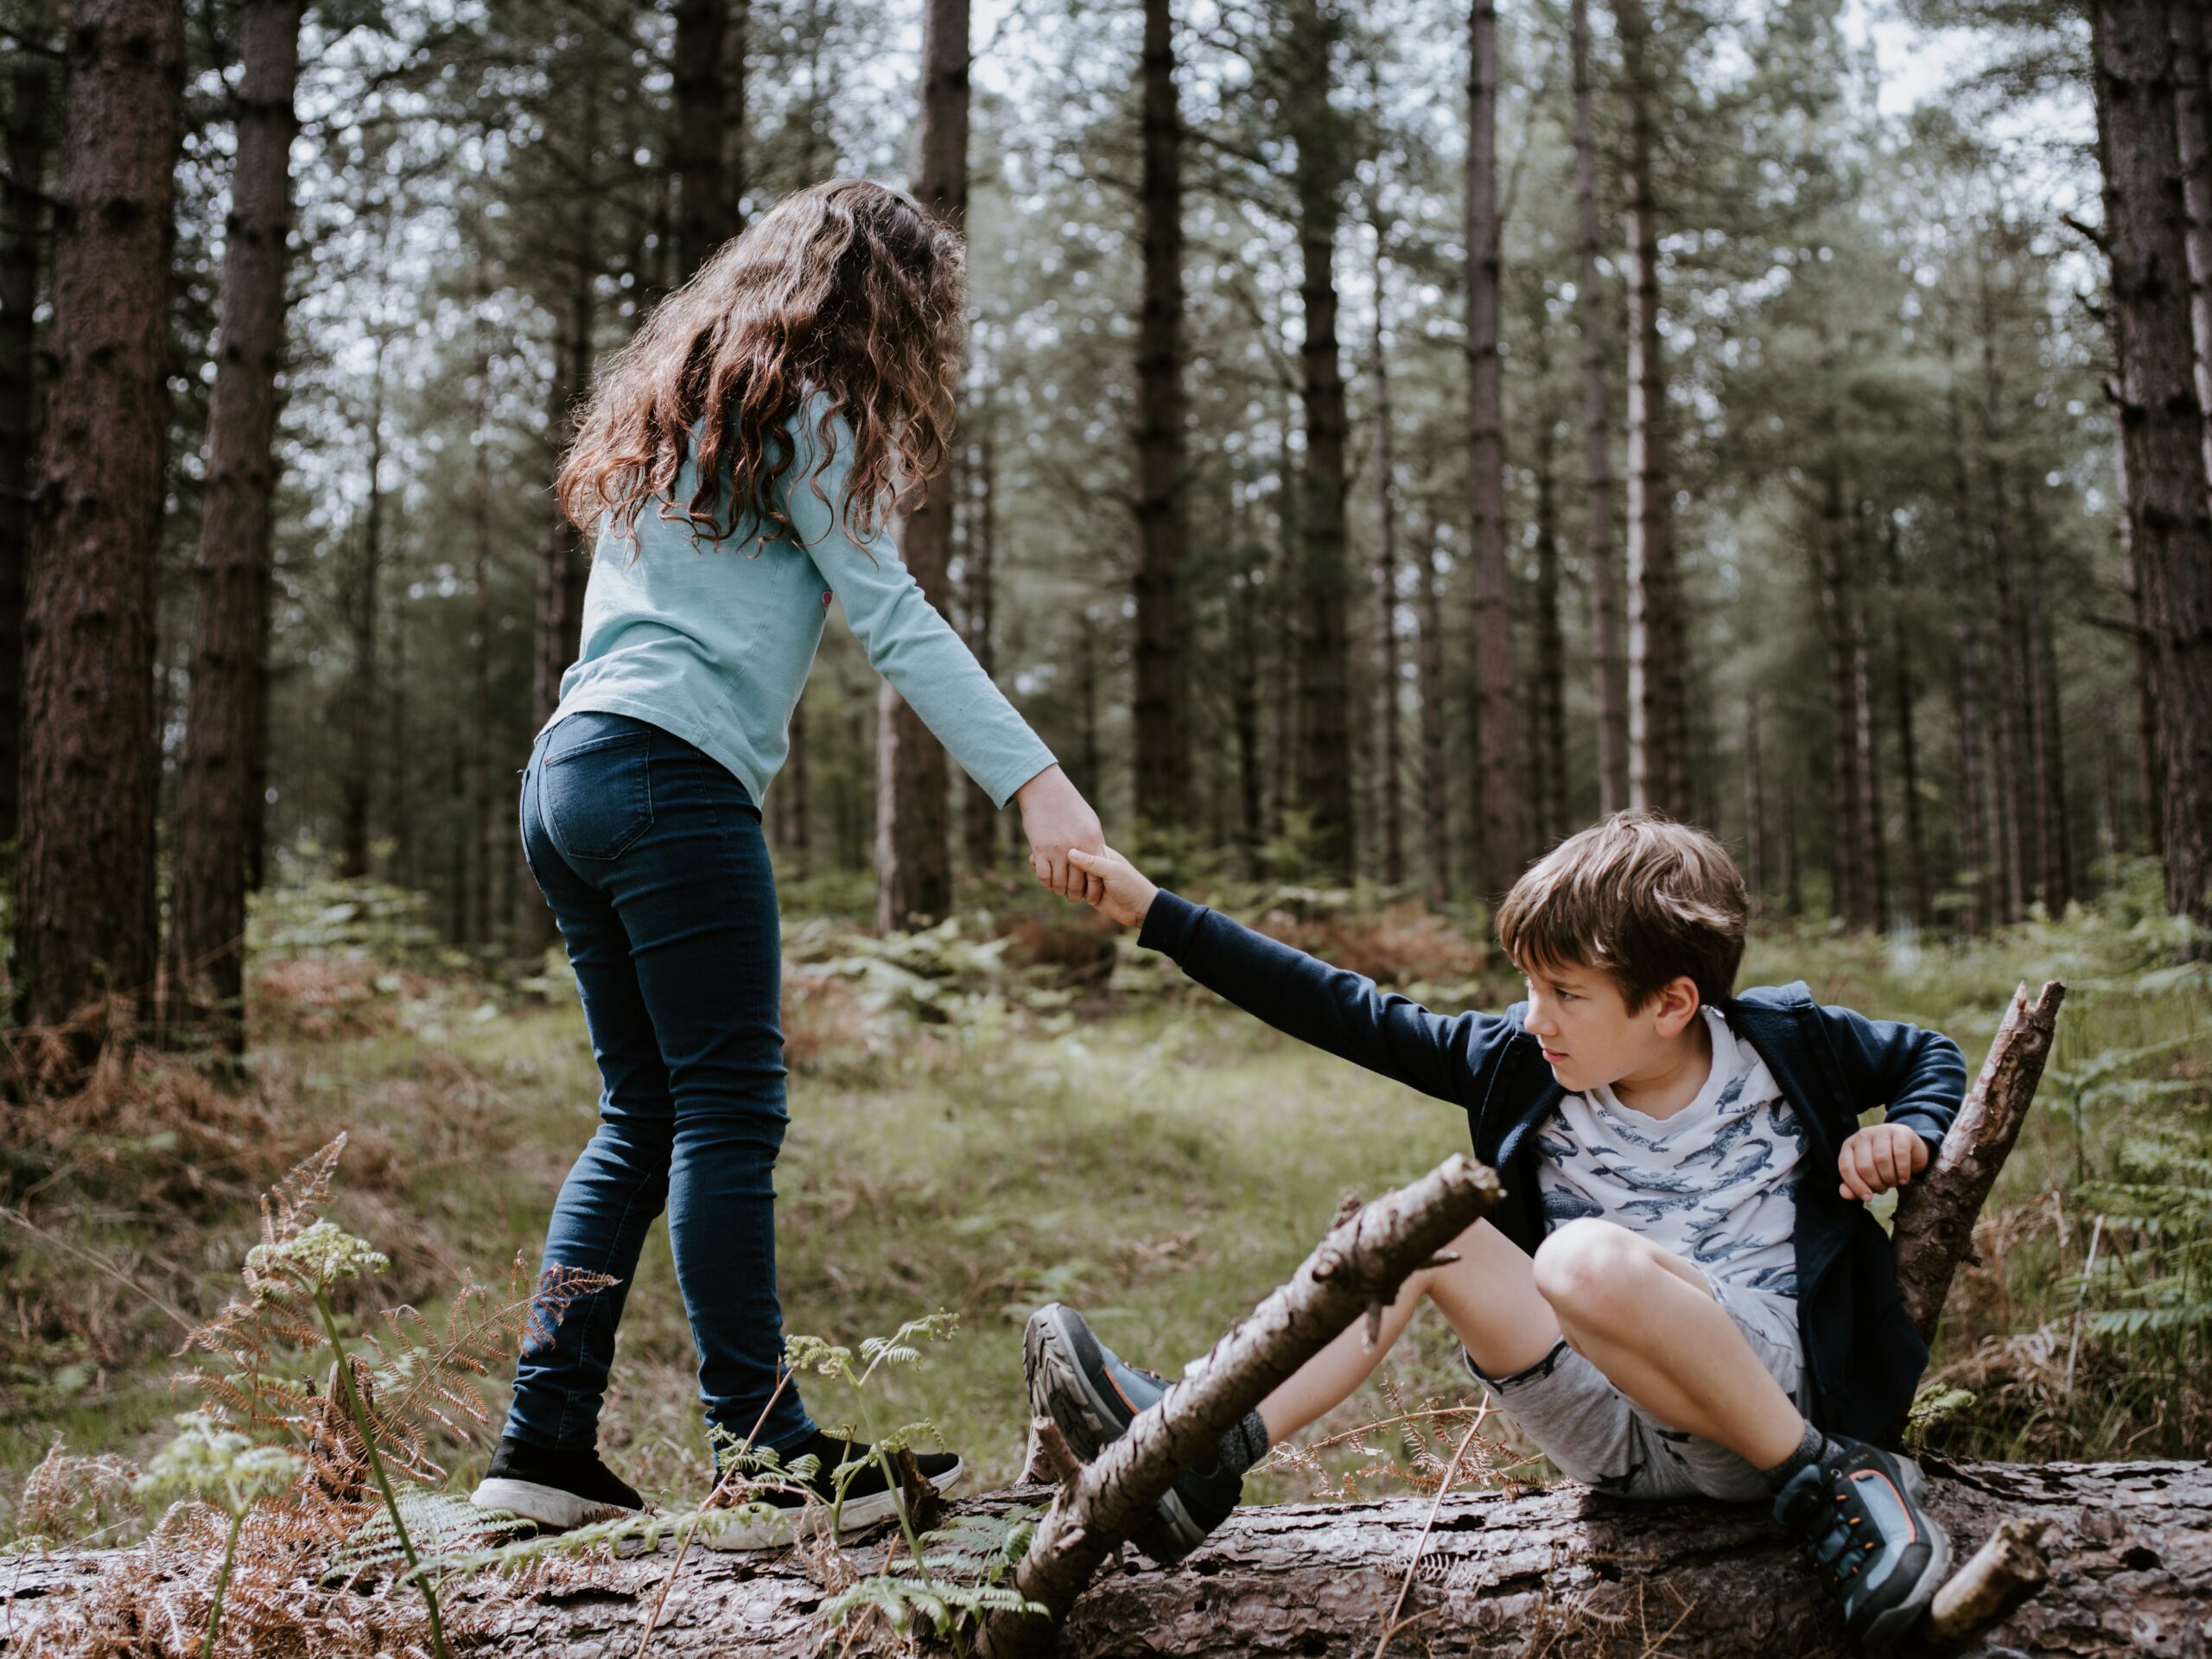 Girl helping boy up from log